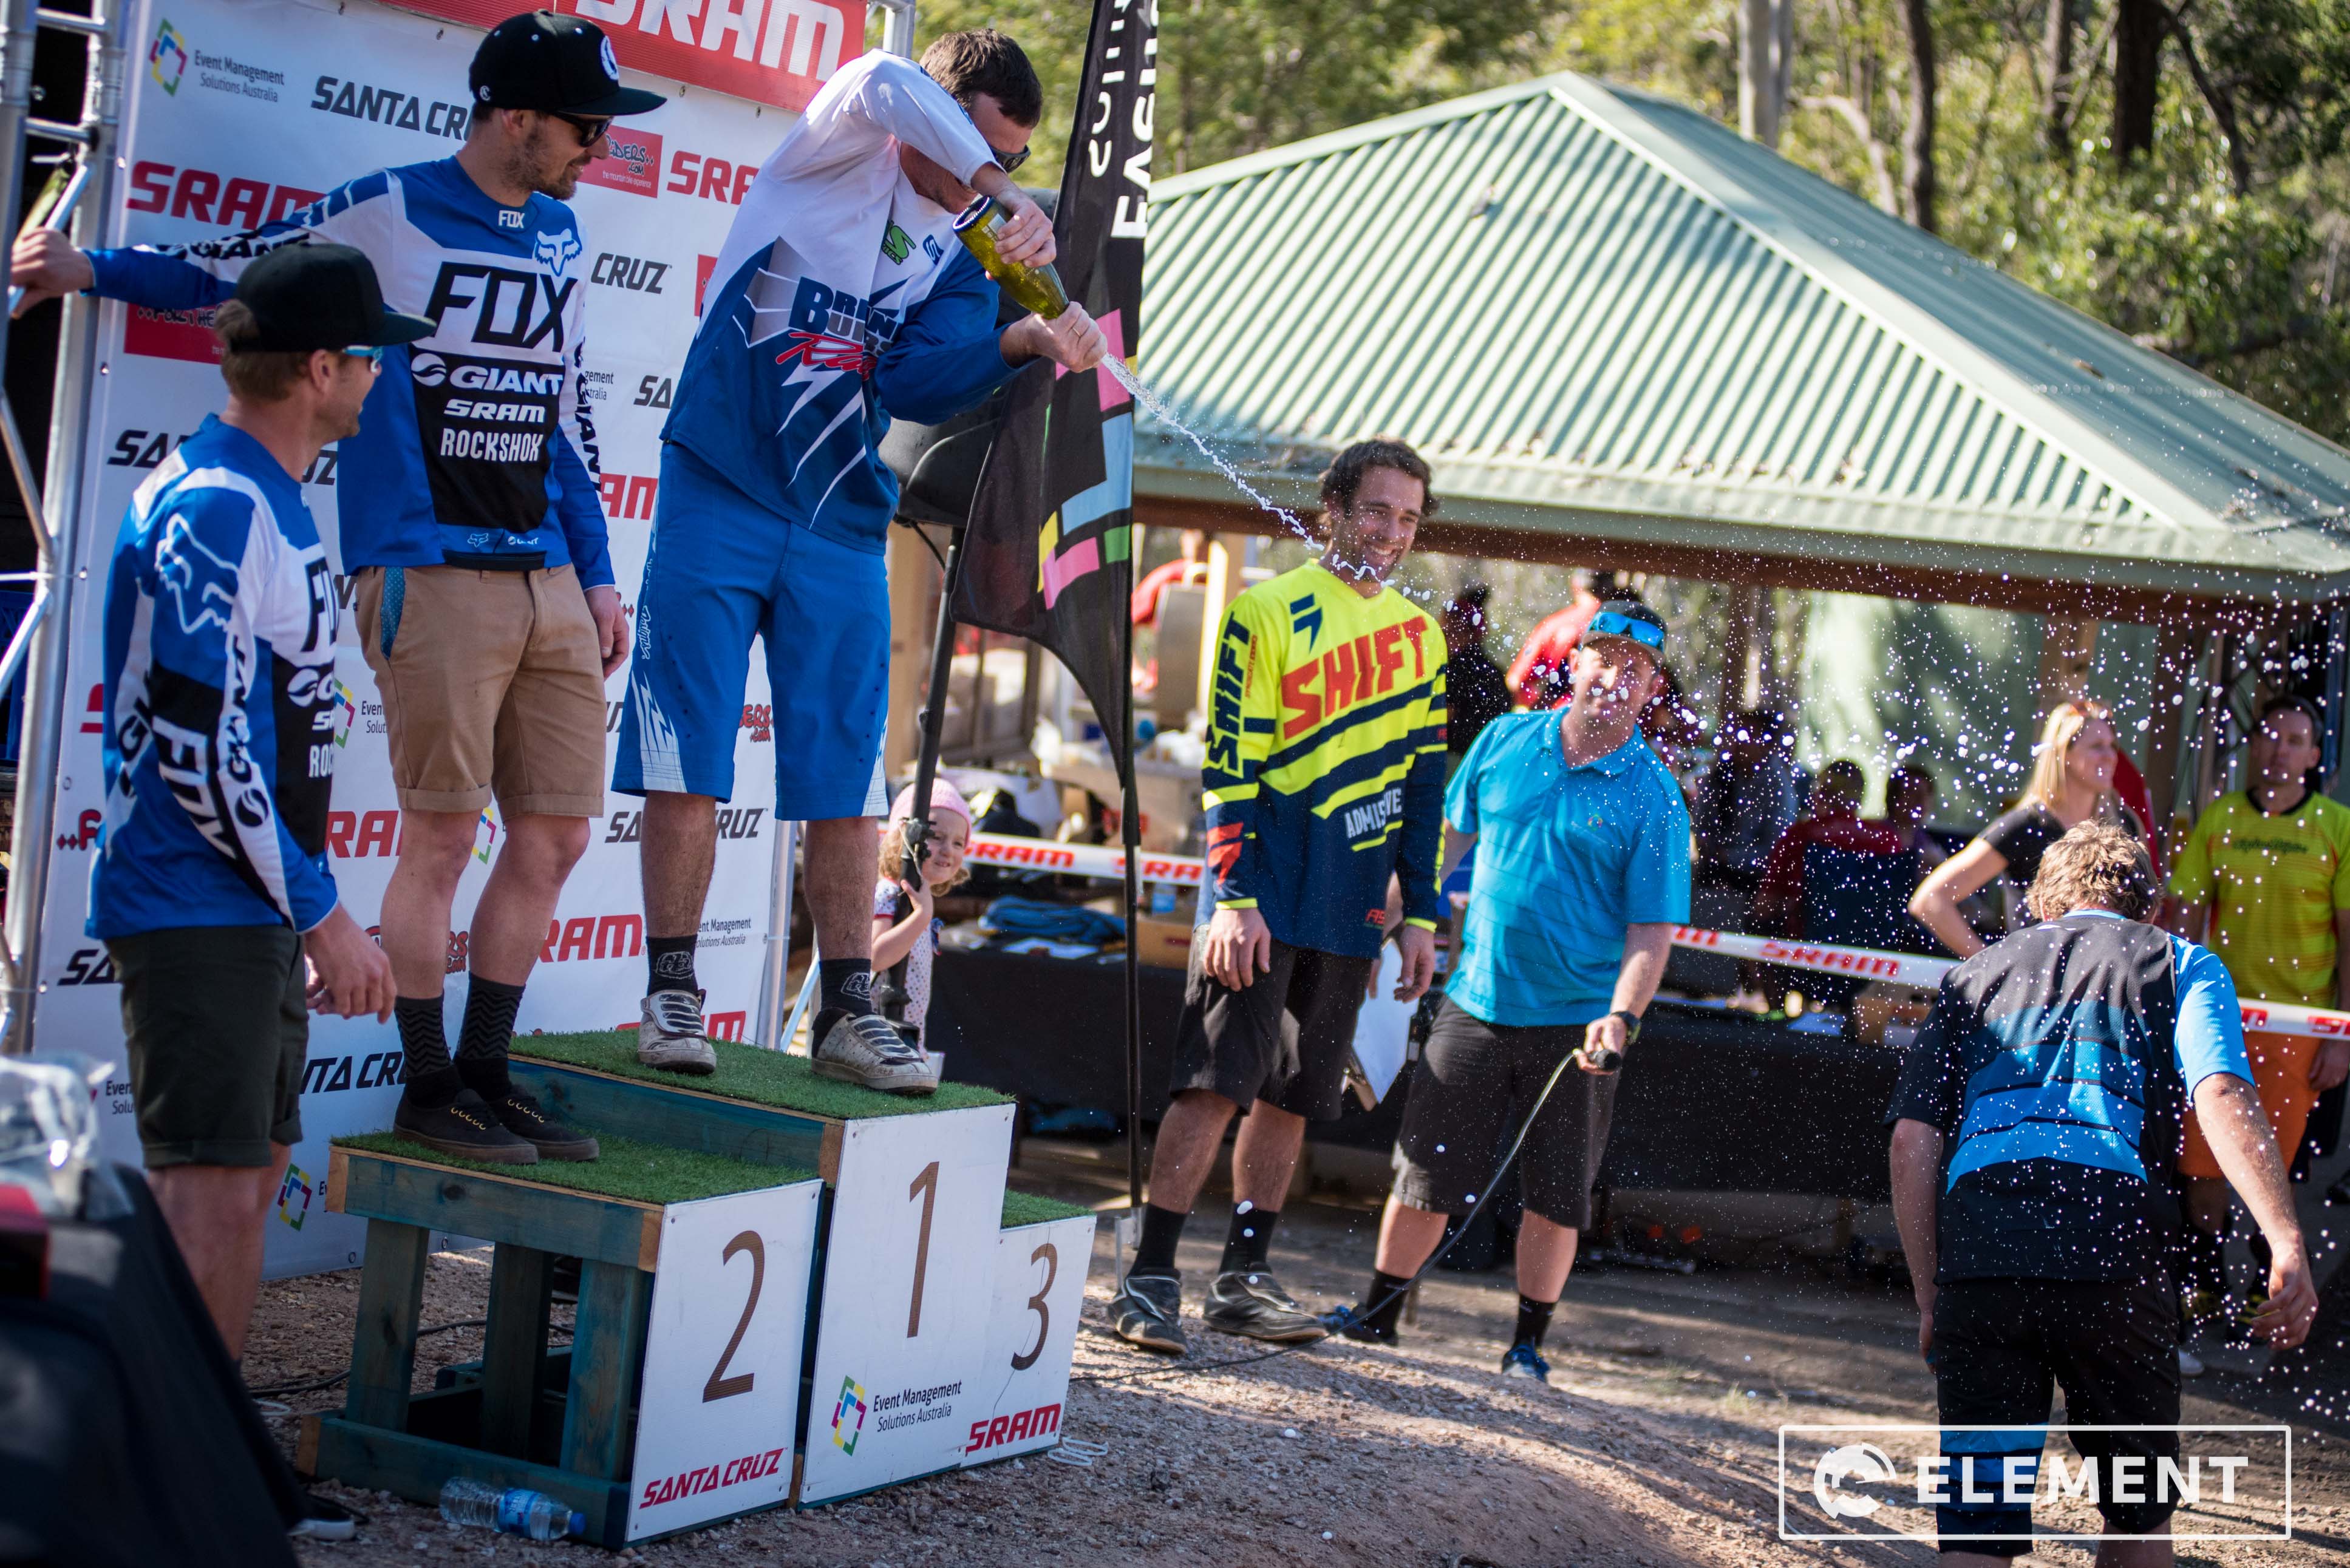 Photos from the SEQ Gravity Enduro Series, Round 4 at Toowoomba 2-8-2015. Photos by Element.